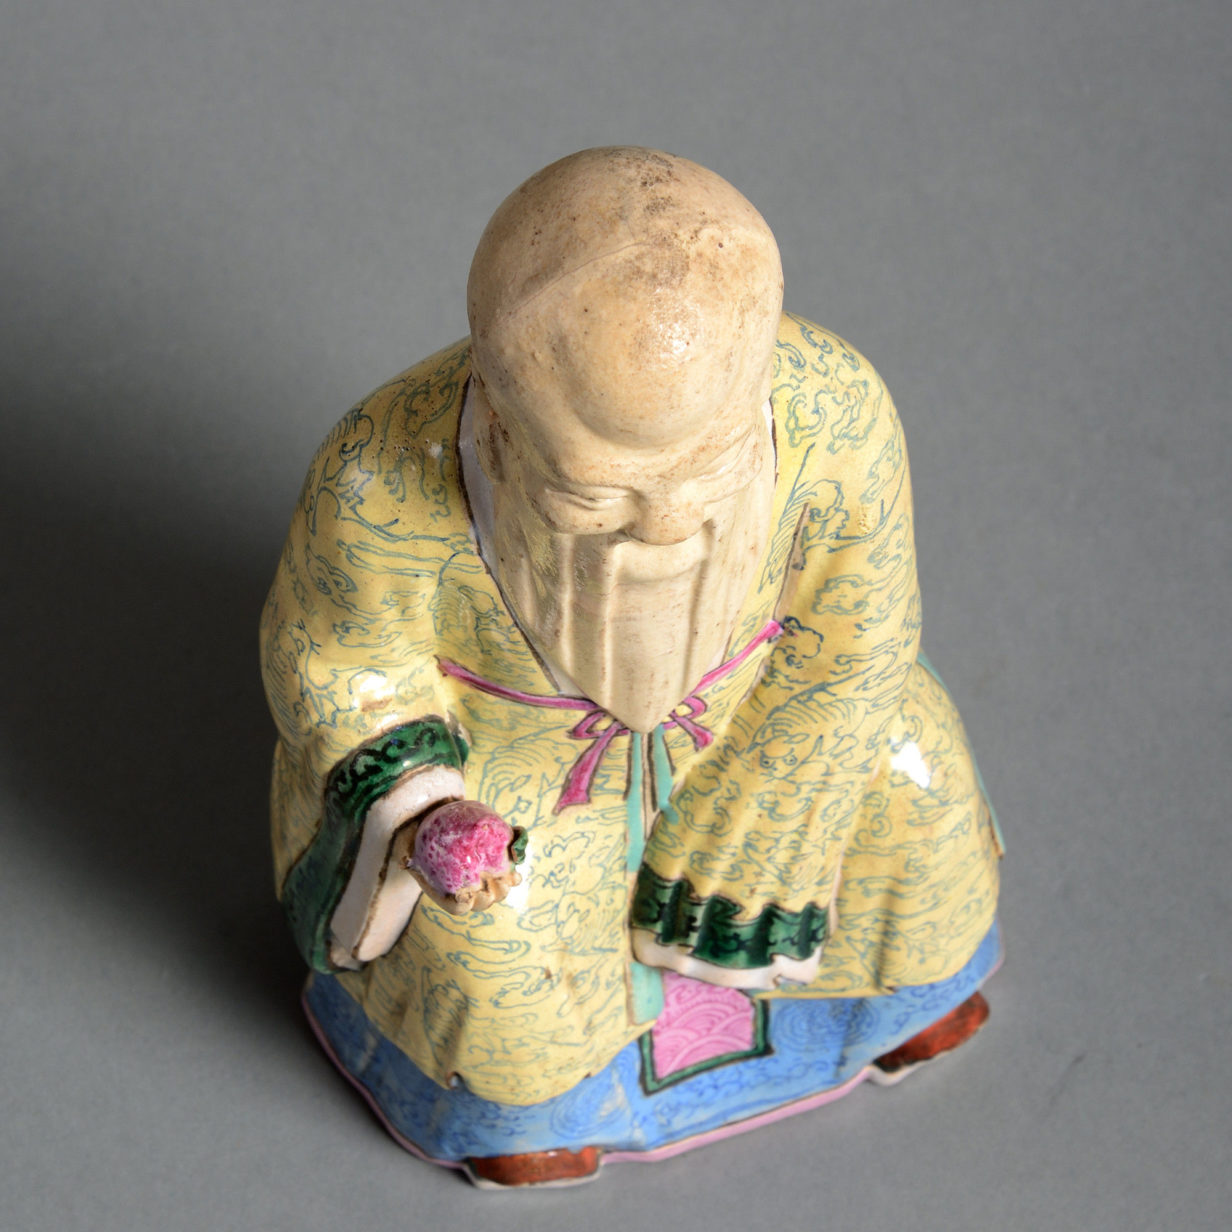 A 19th century qing dynasty porcelain immortal